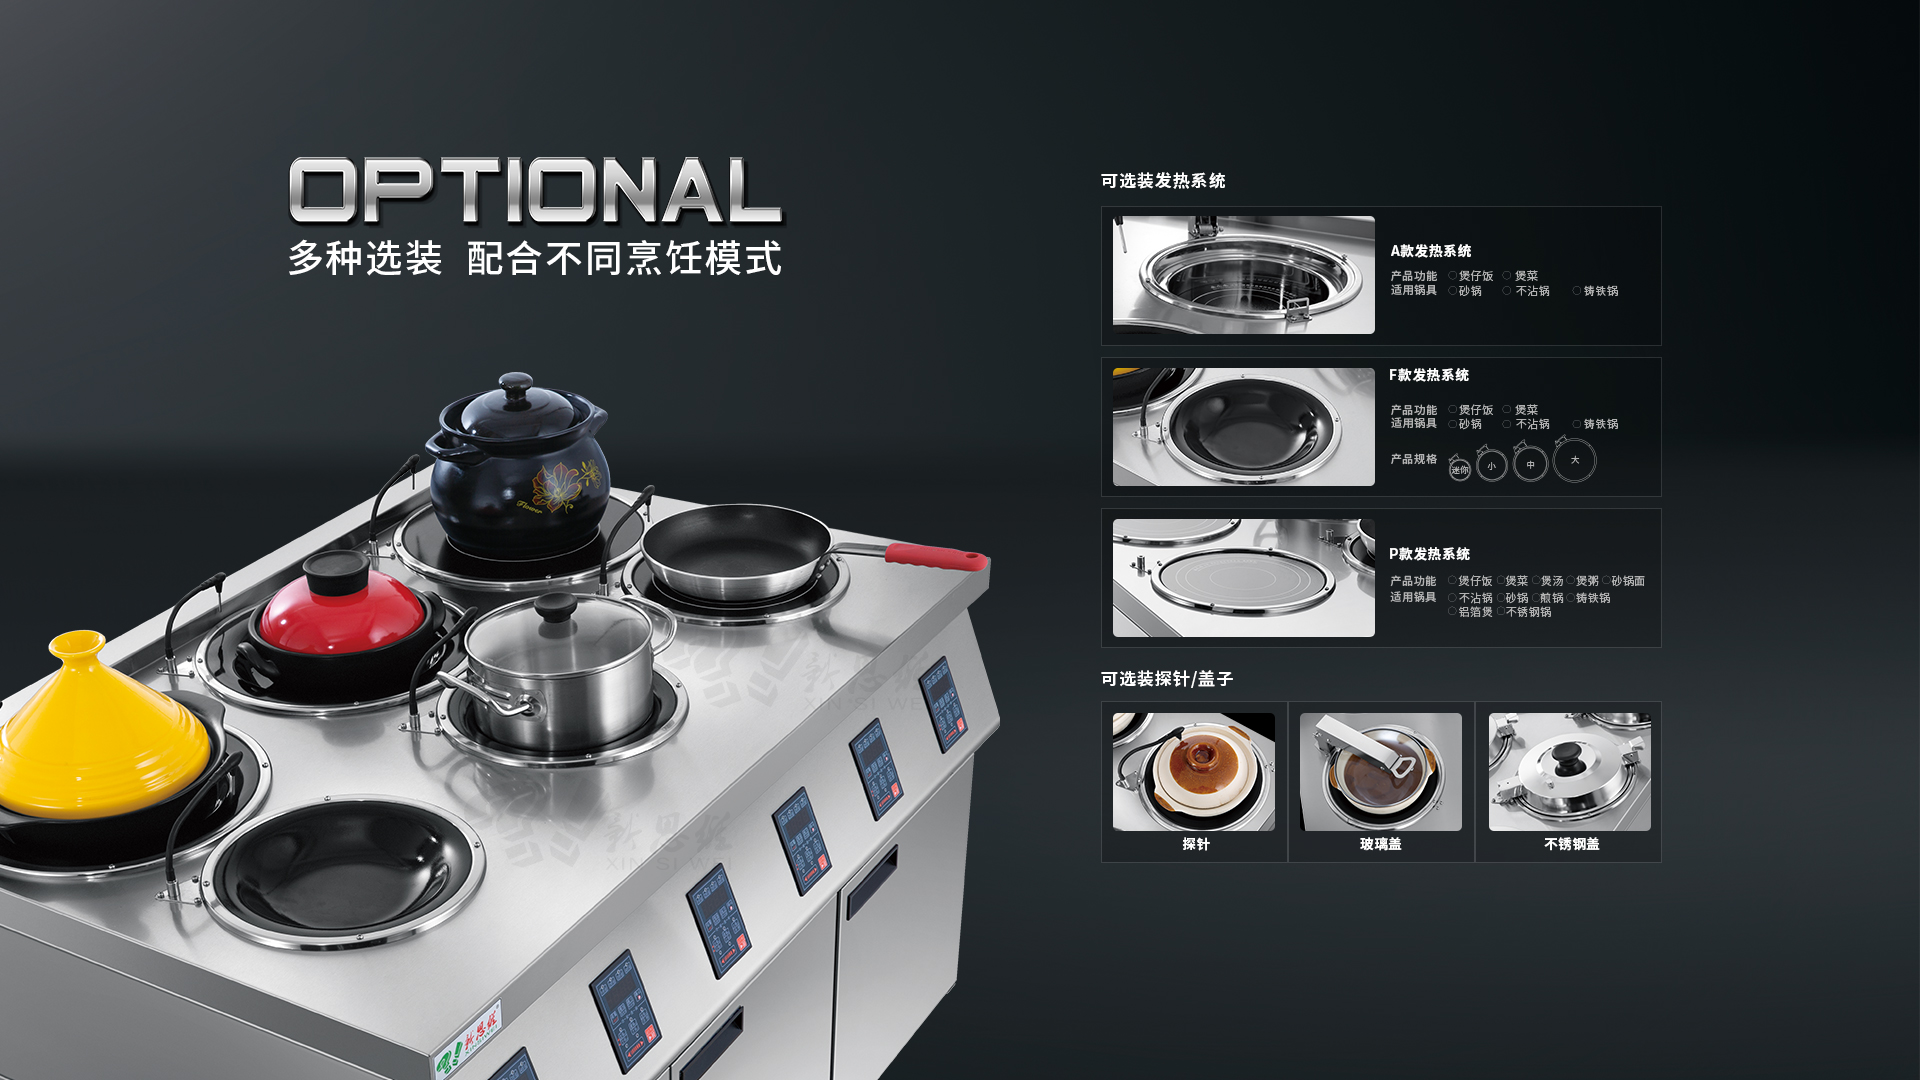 xinsiwei_combination_clay_pot_stove_details_page_Optional.jpg